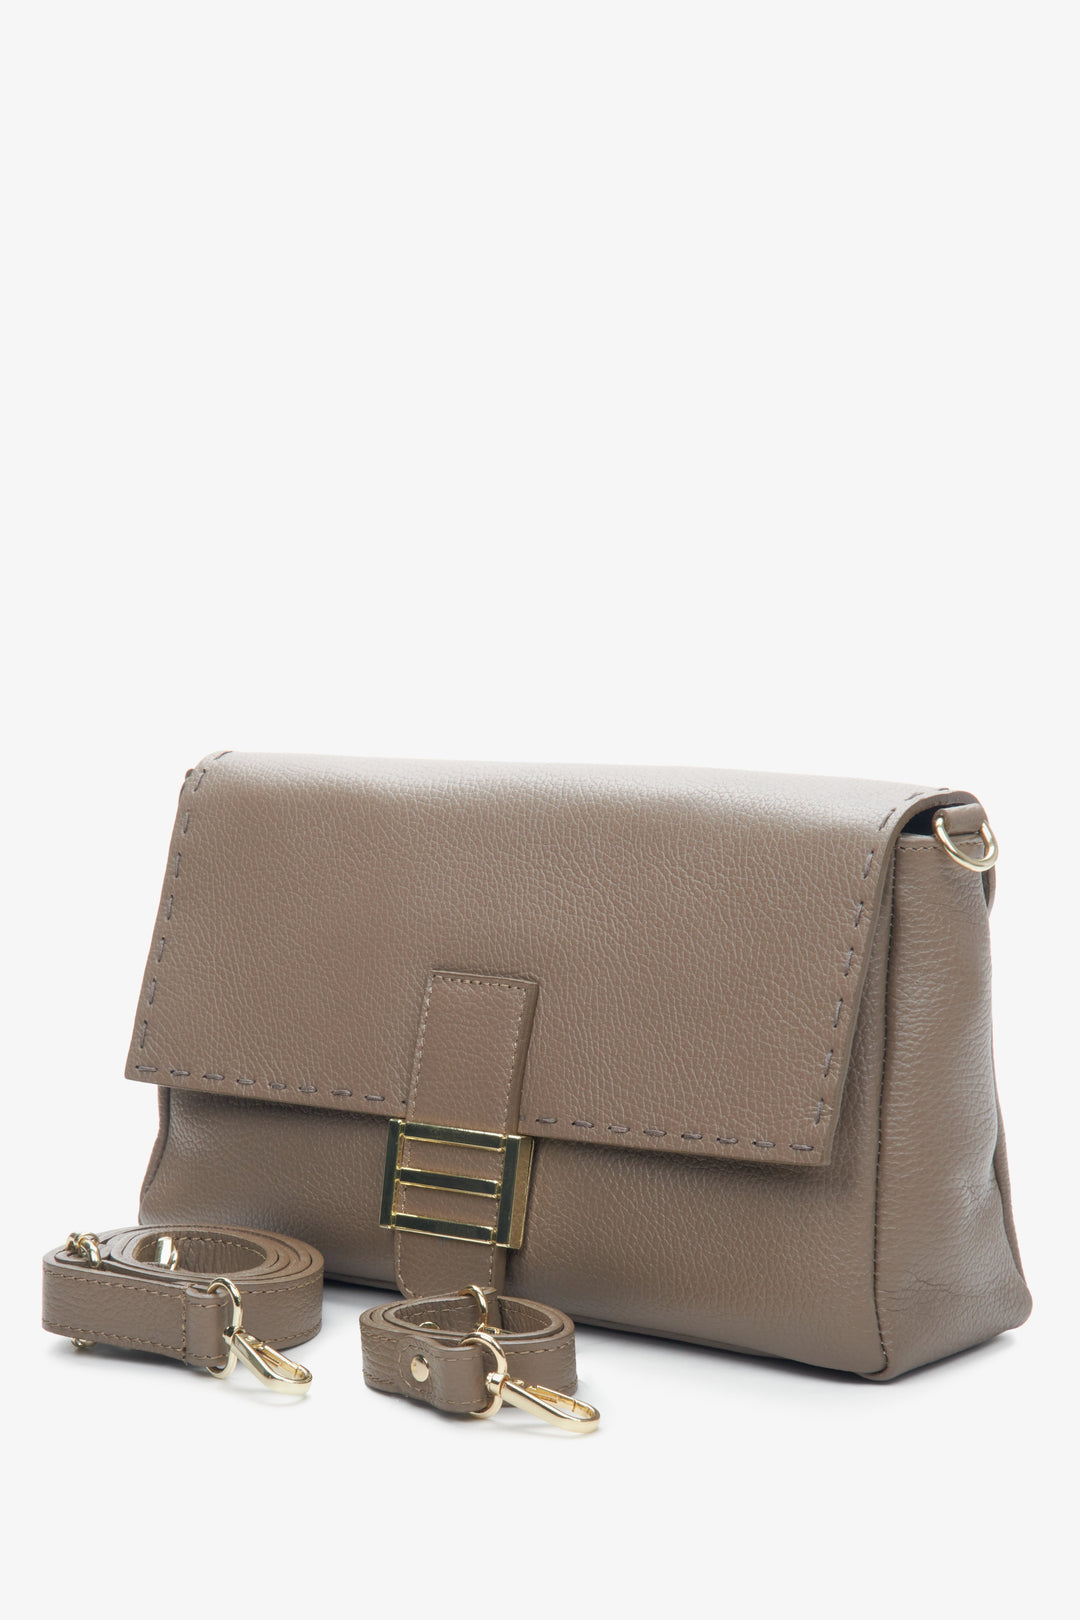 Women's grey and beige leather handbag by Estro with golden hardware.